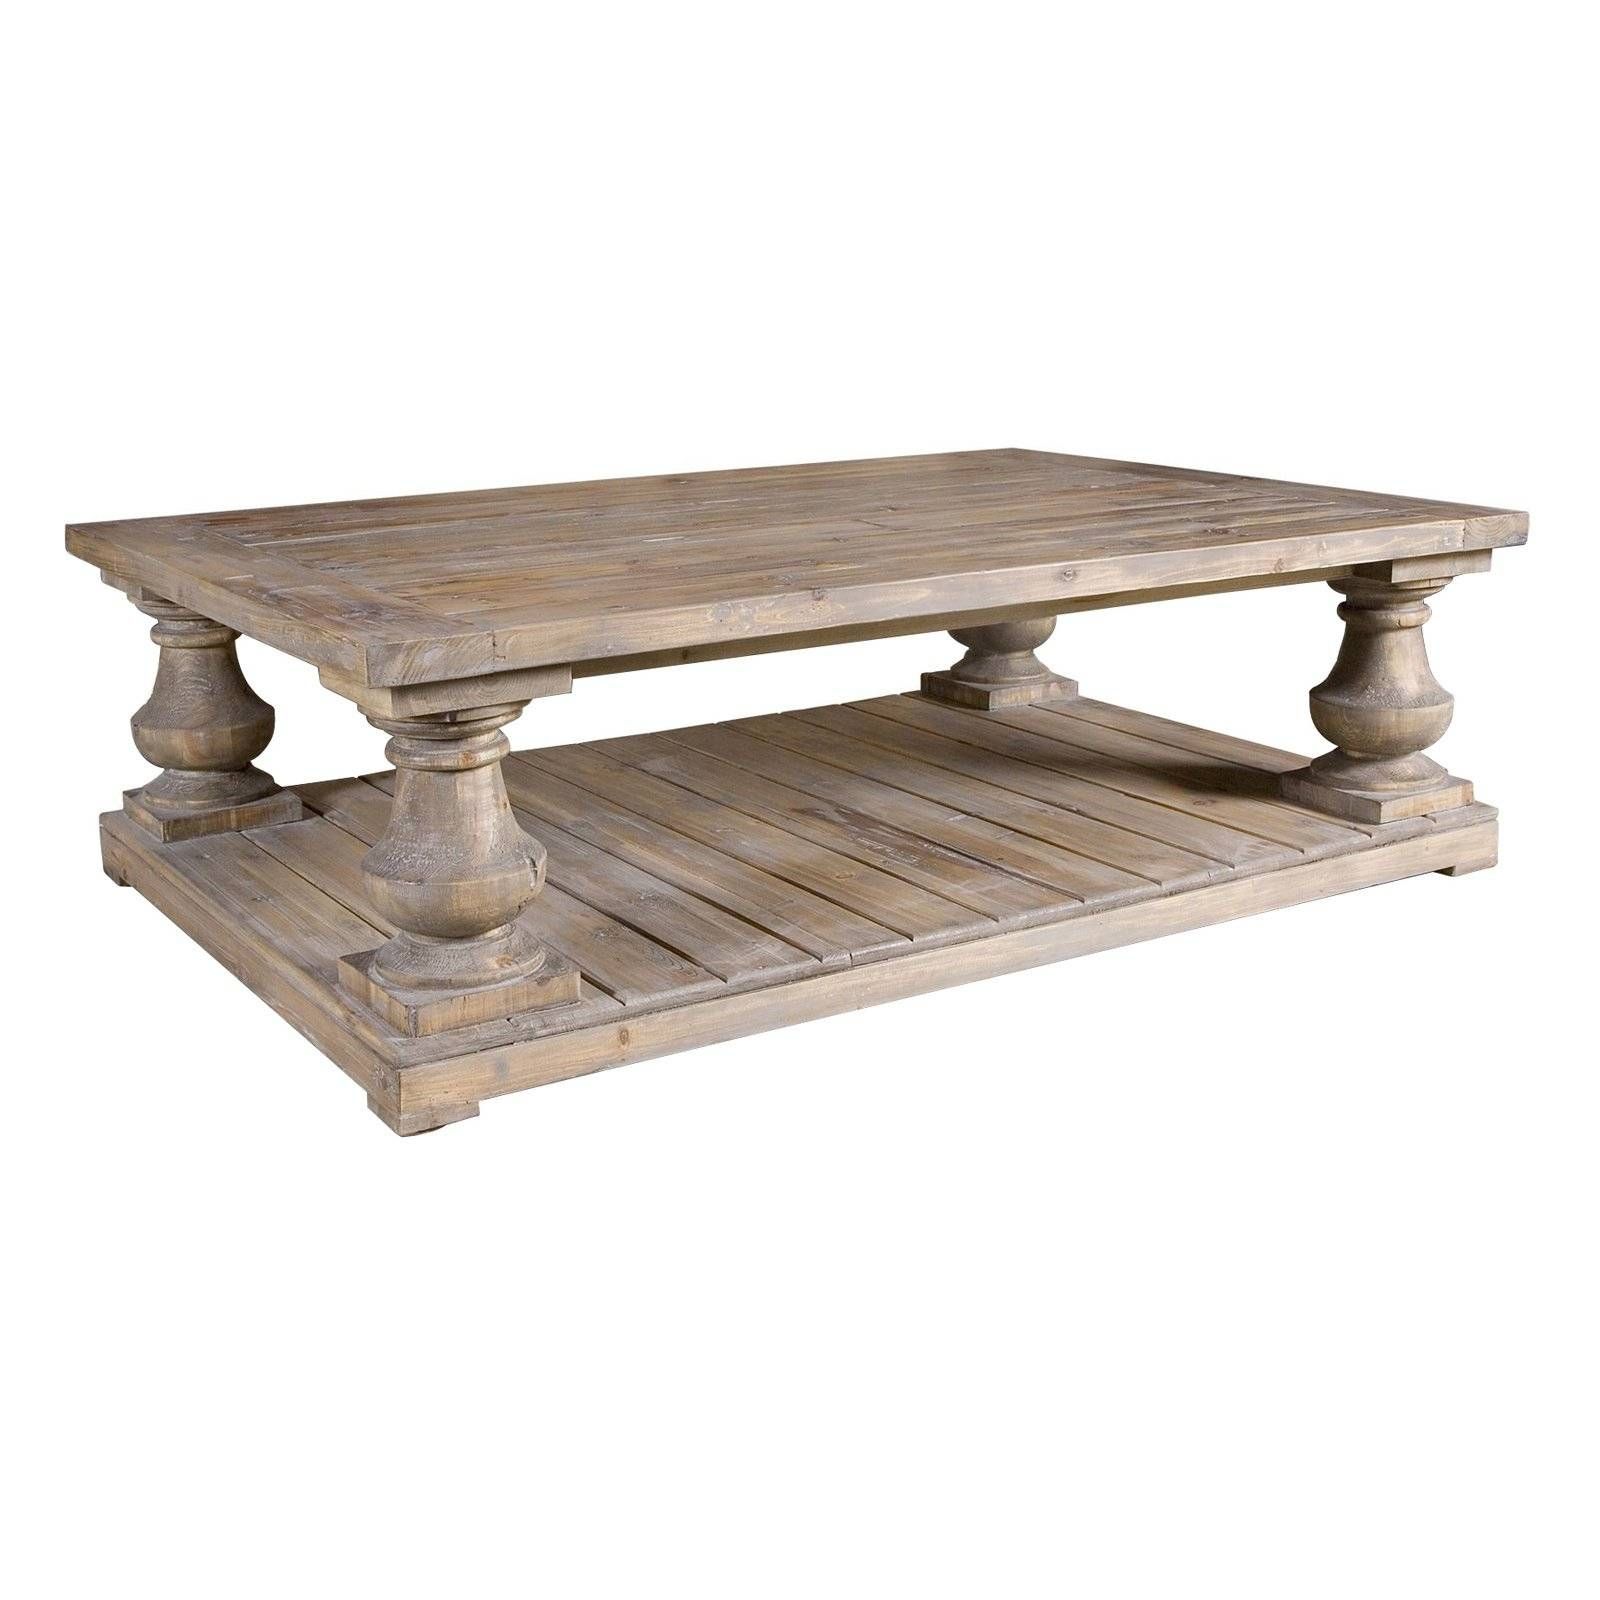 Uttermost Stratford Cocktail Table – Coffee Tables At Hayneedle With Regard To Gray Wash Coffee Tables (View 17 of 30)